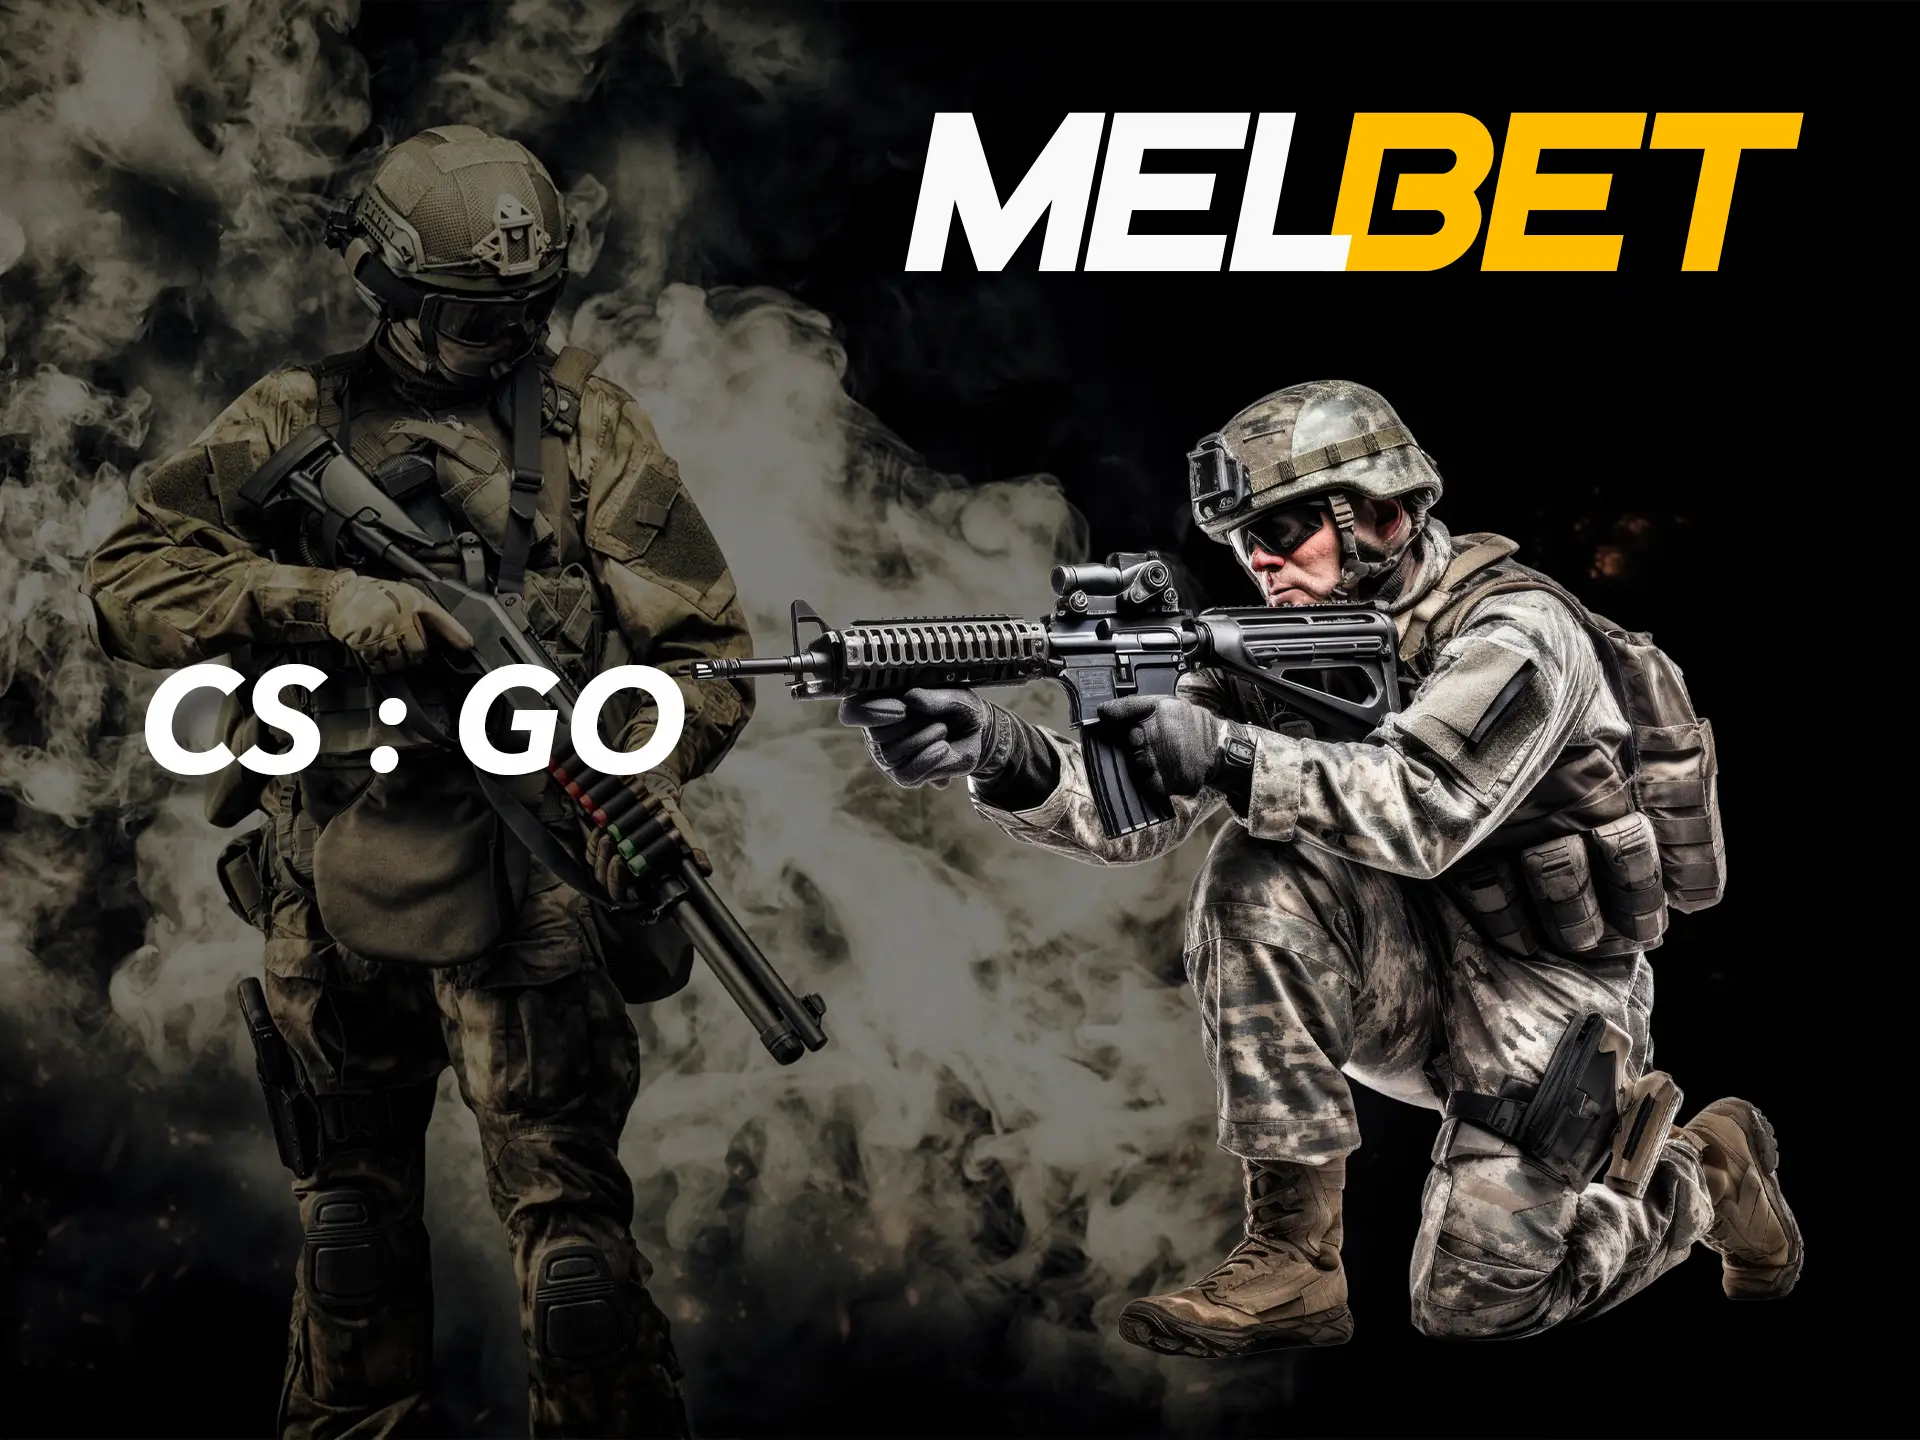 The cyber sports teams of the cs go discipline are waiting for your bets at Melbet.